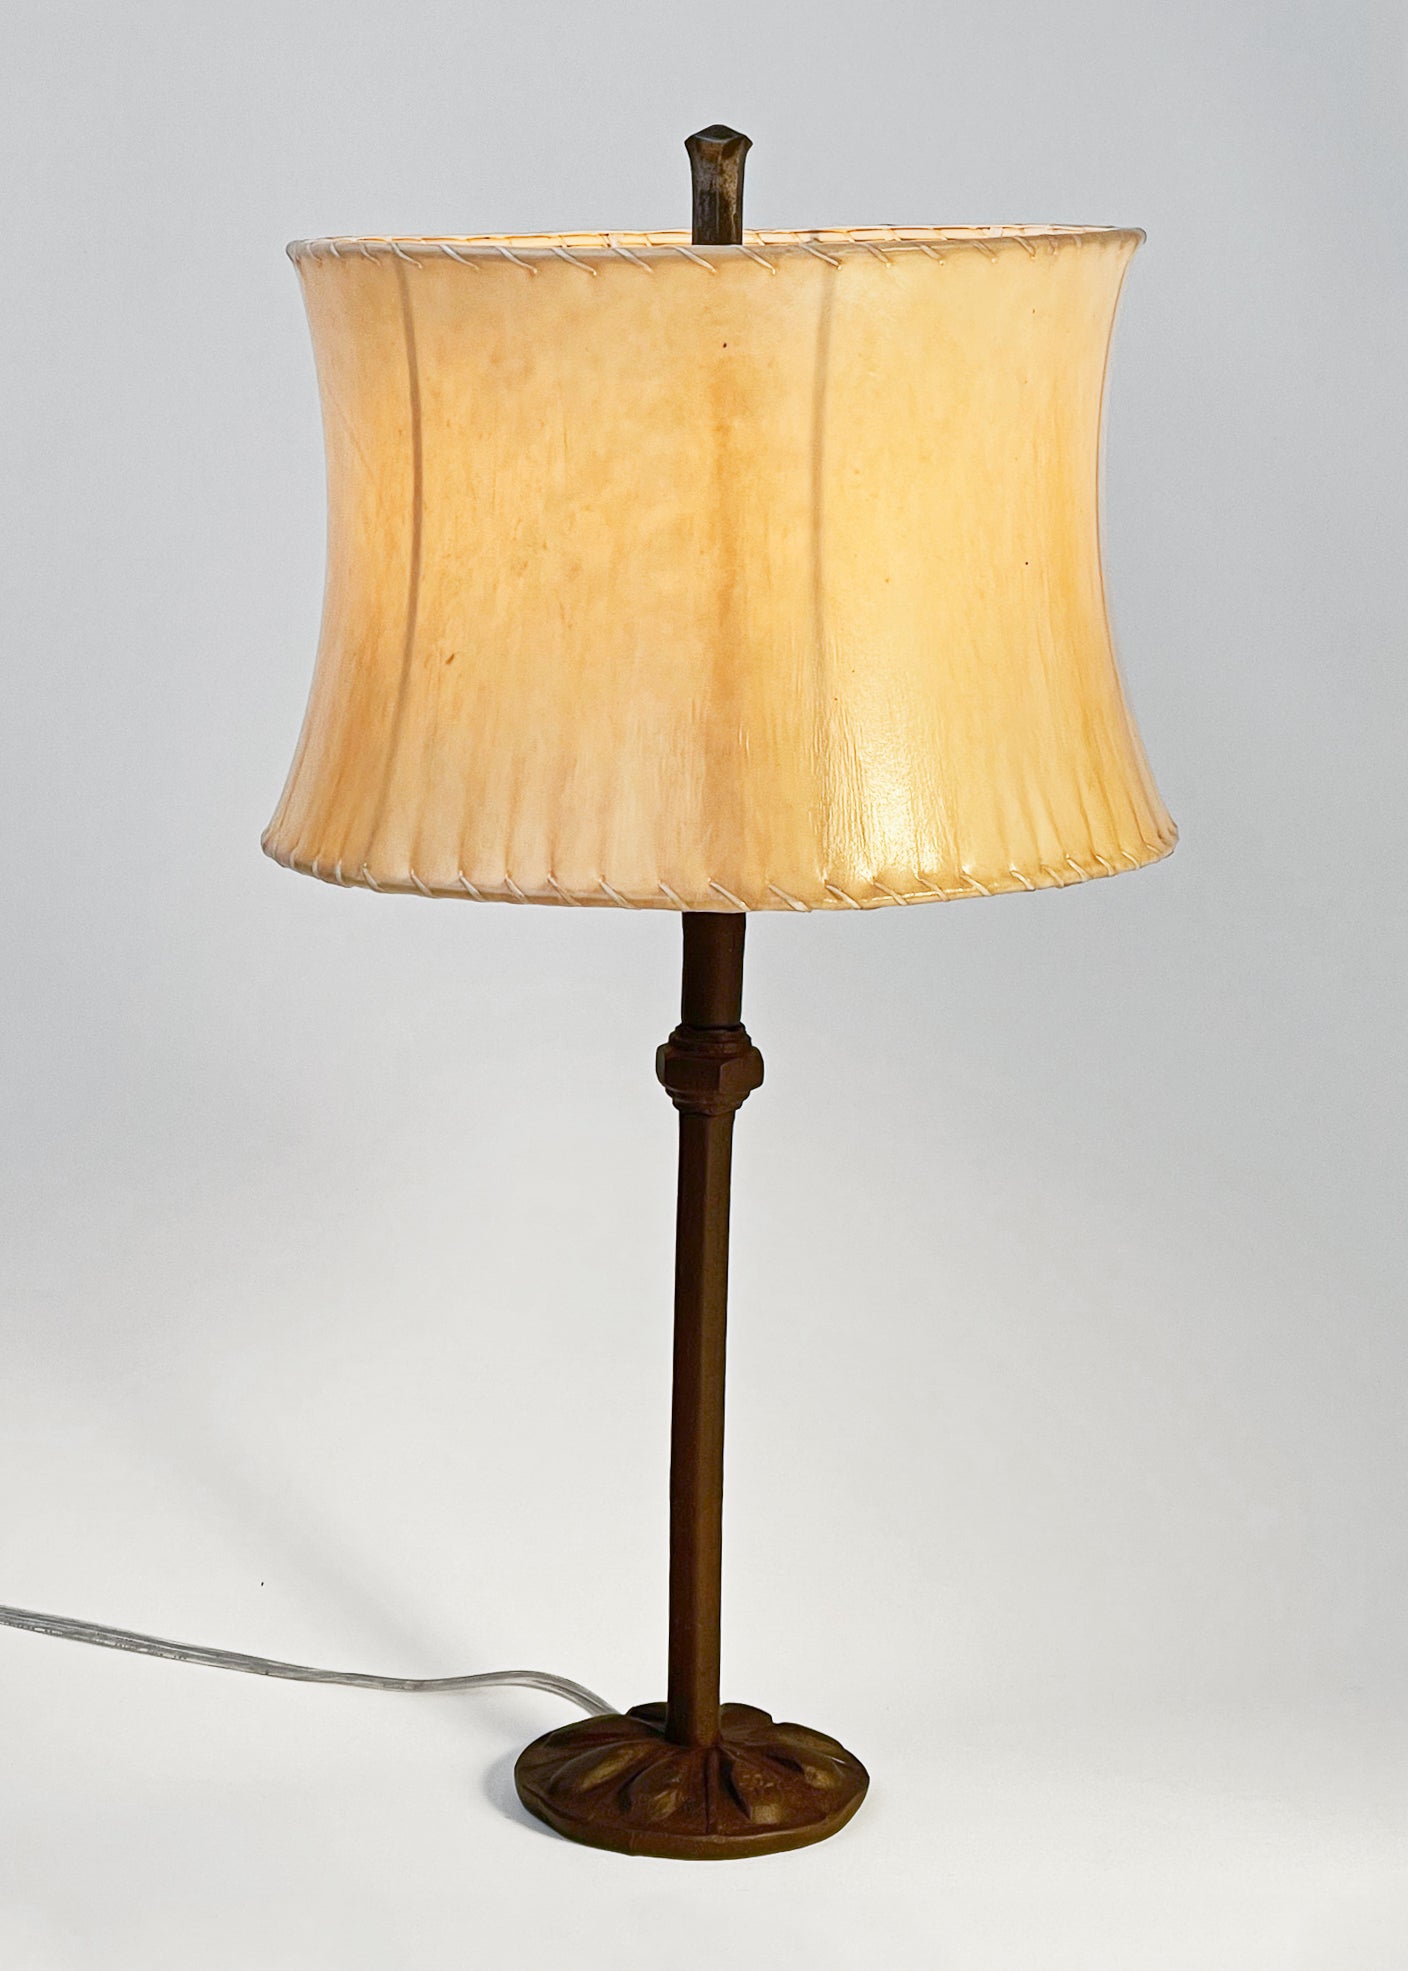 Etruscan Lamp with a Contemporary Sheepskin Shade.